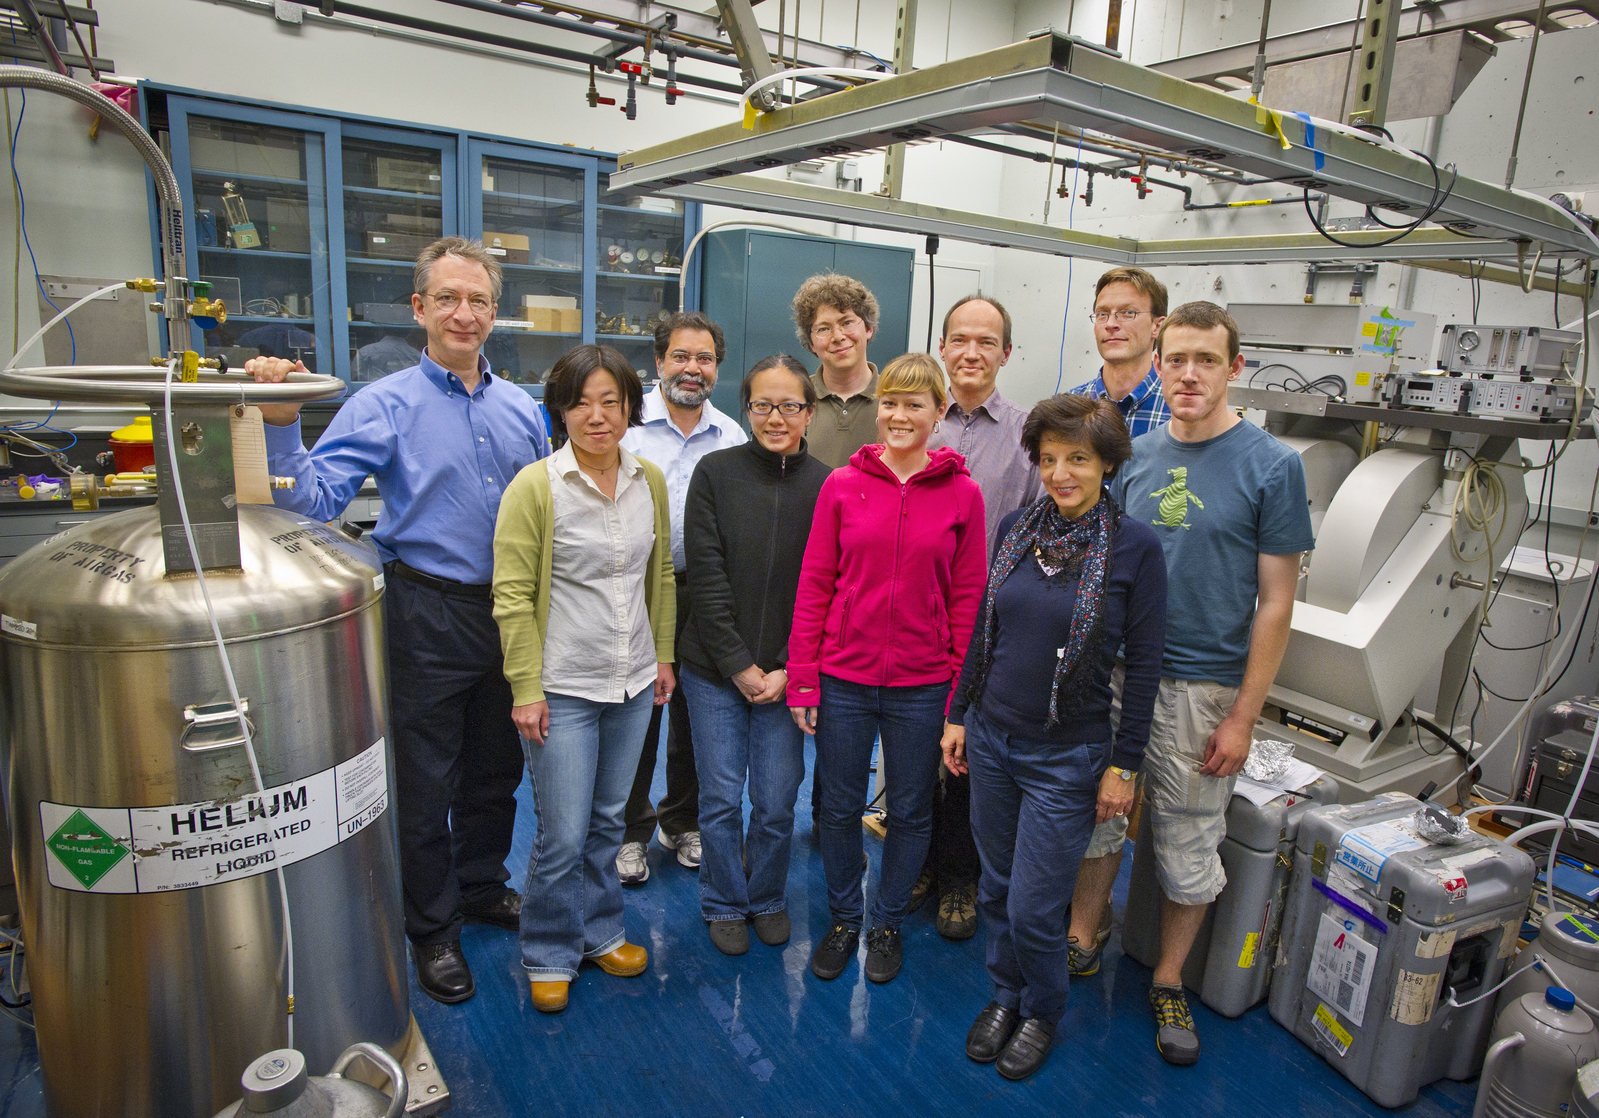 Members of the international team that used the LCLS to image the photosystem II complex at room temperature included (from left) Nick Sauter, Junko Yano, Vittal Yachandra, Rosalie Tran, Jan Kern, Julia Hellmich, Johannes Messinger, Athina Zouni, Johan Hattne and Richard Gildea. (Photo by Roy Kaltschmidt) 